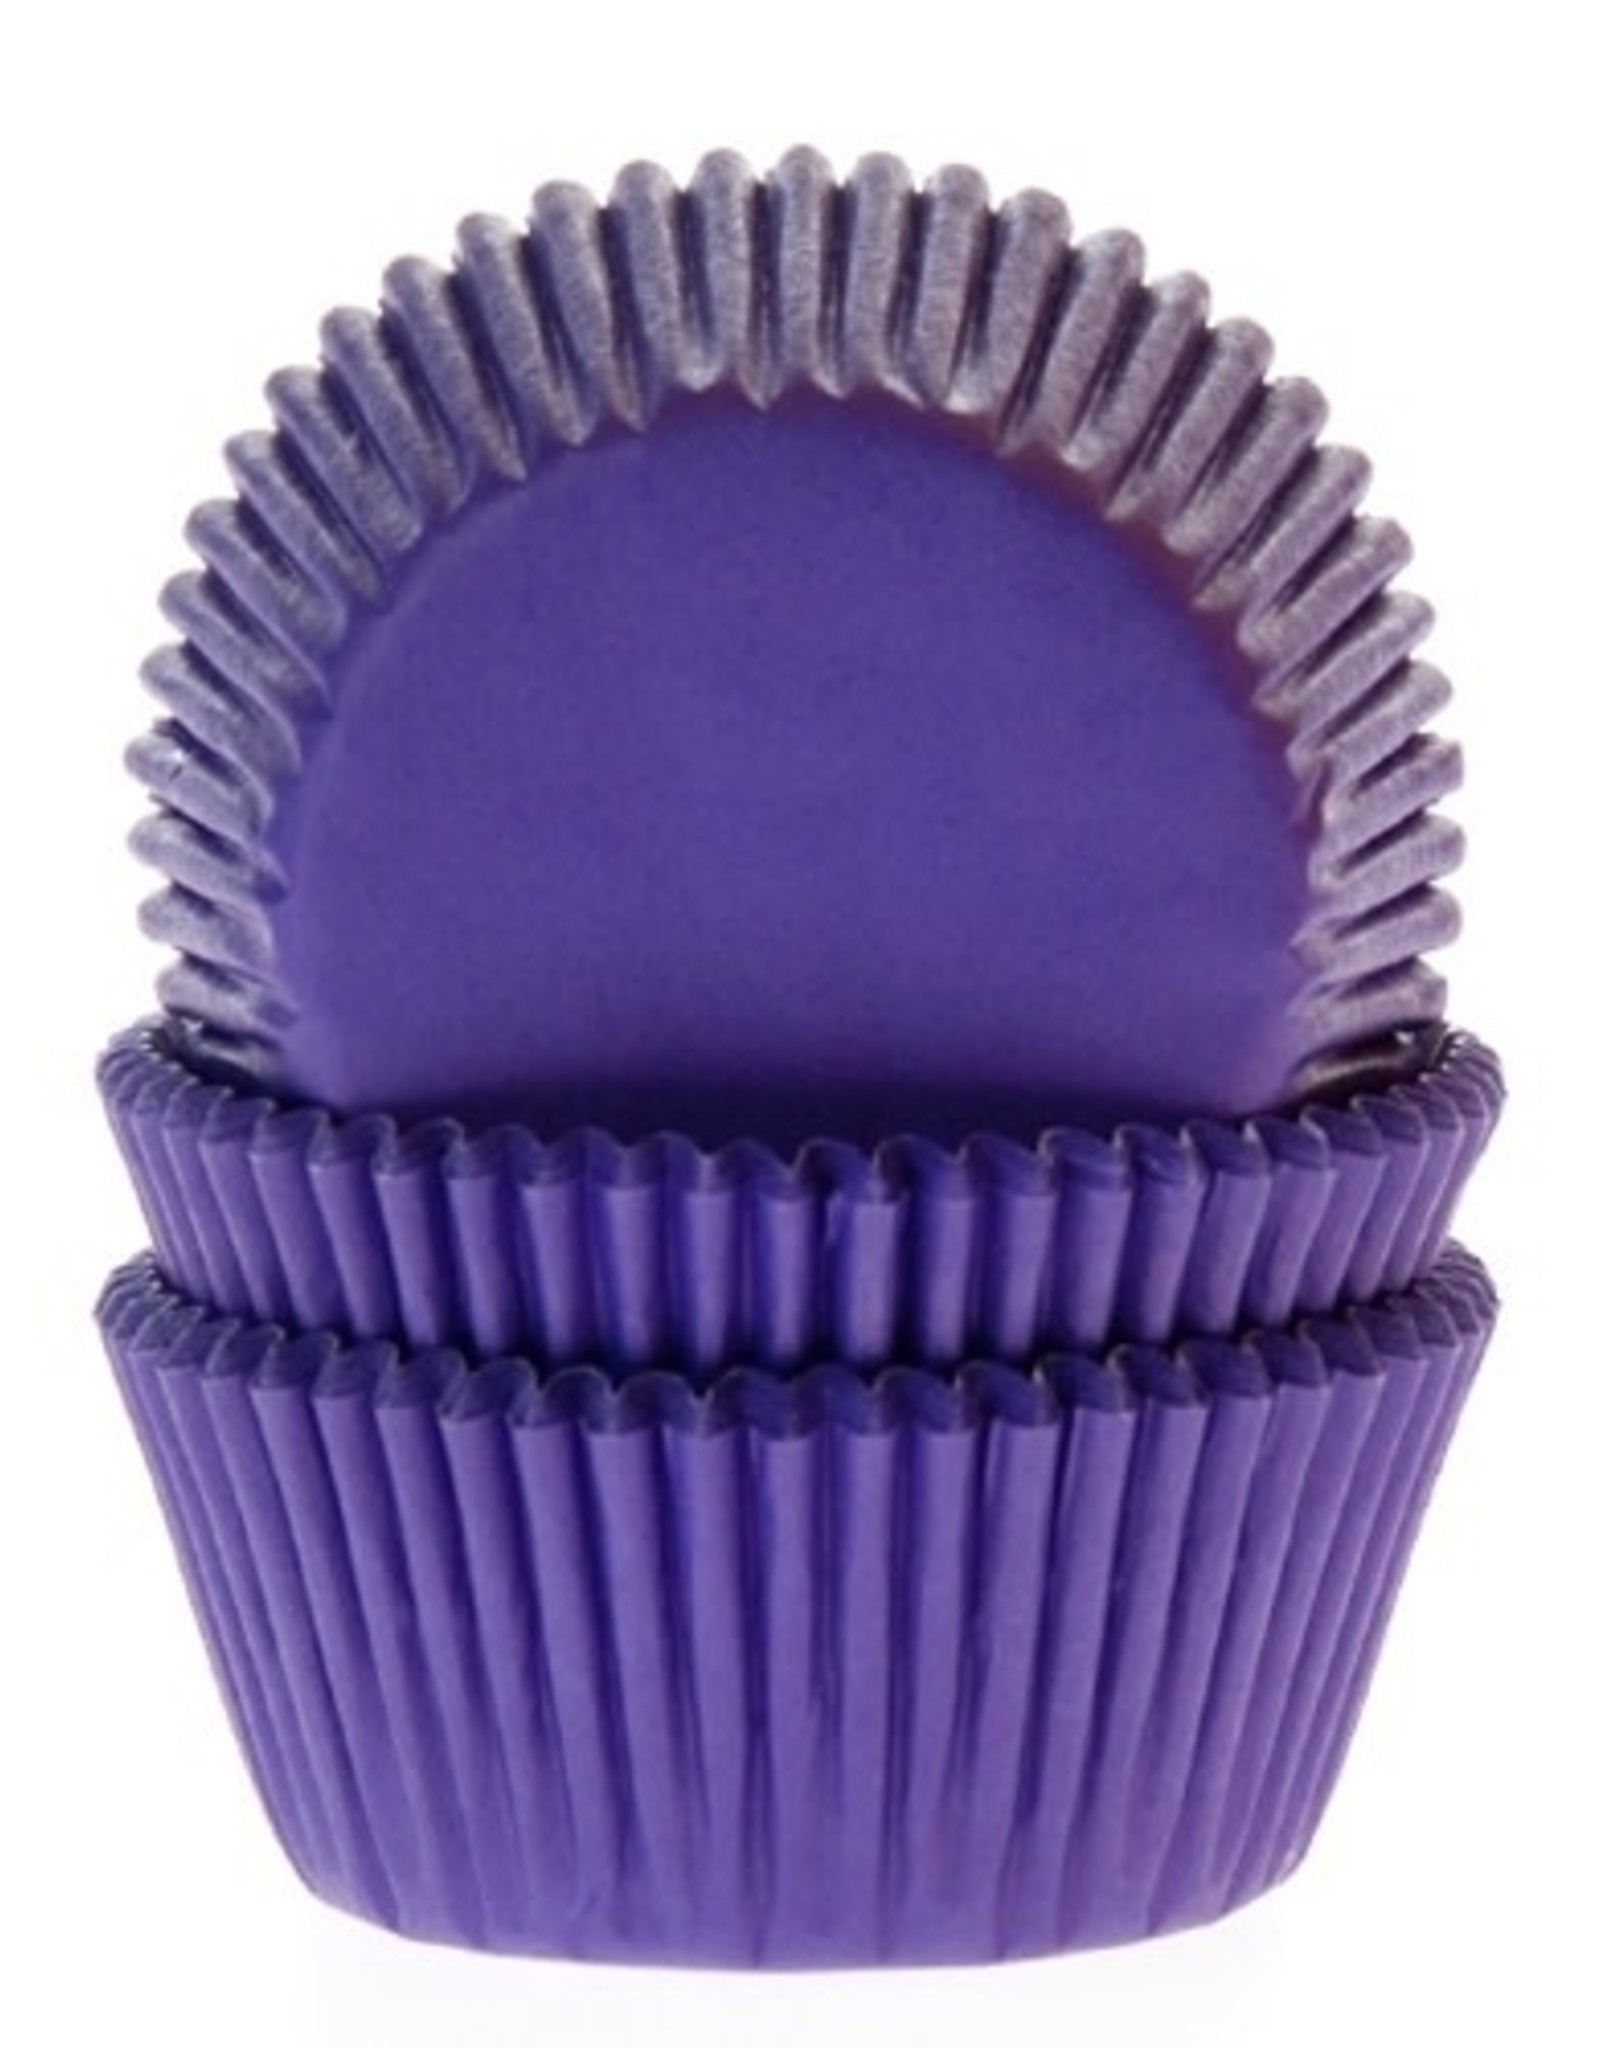 House of Marie House of Marie Baking Cups Paars/Violet - pk/50